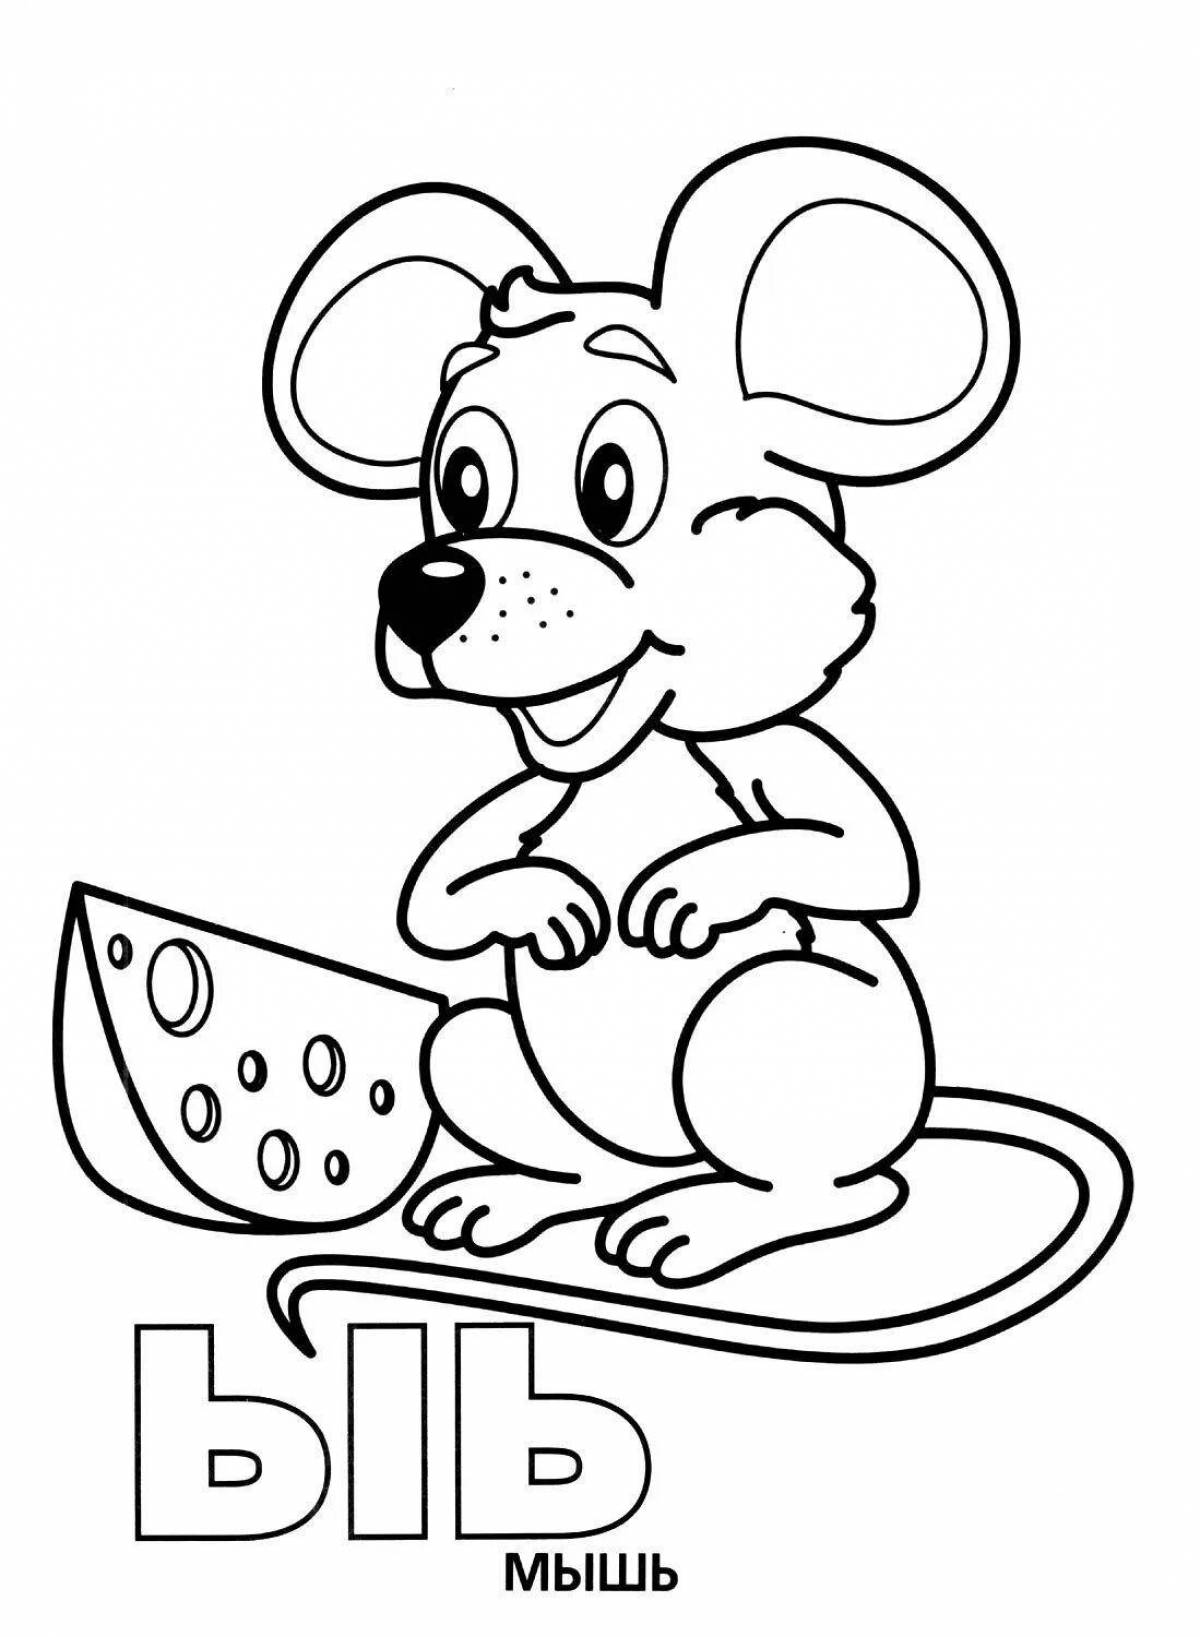 Fun coloring book with letter s for kids